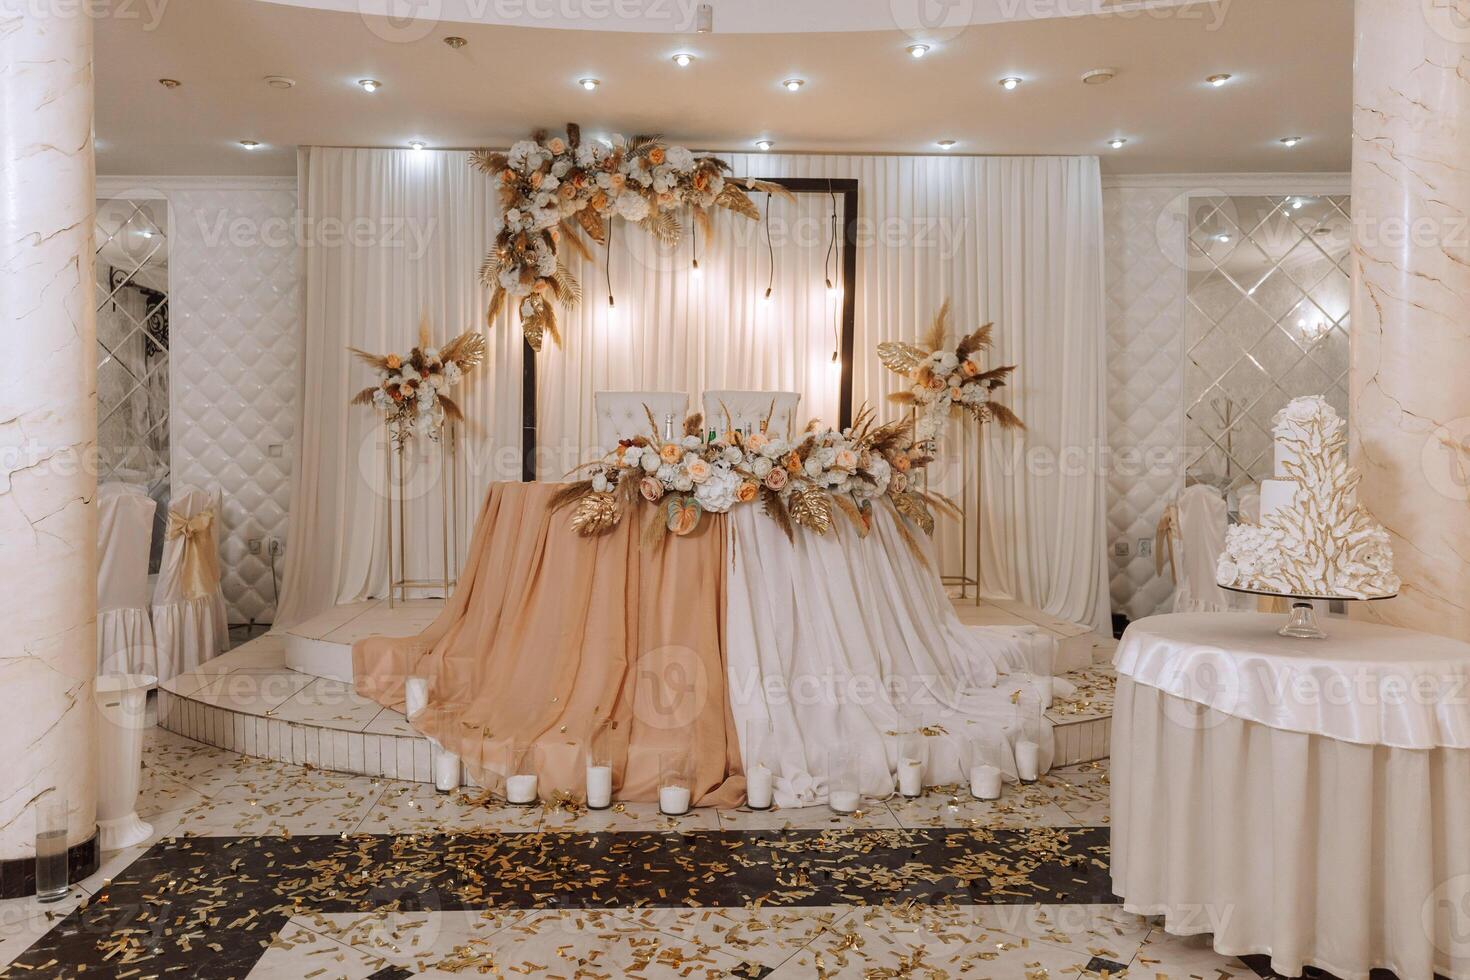 The wedding table of the bride and groom, decorated with flowers, dried ears of corn and white tulle, is made in nude color. Flowers on stands. Wedding details. light photo